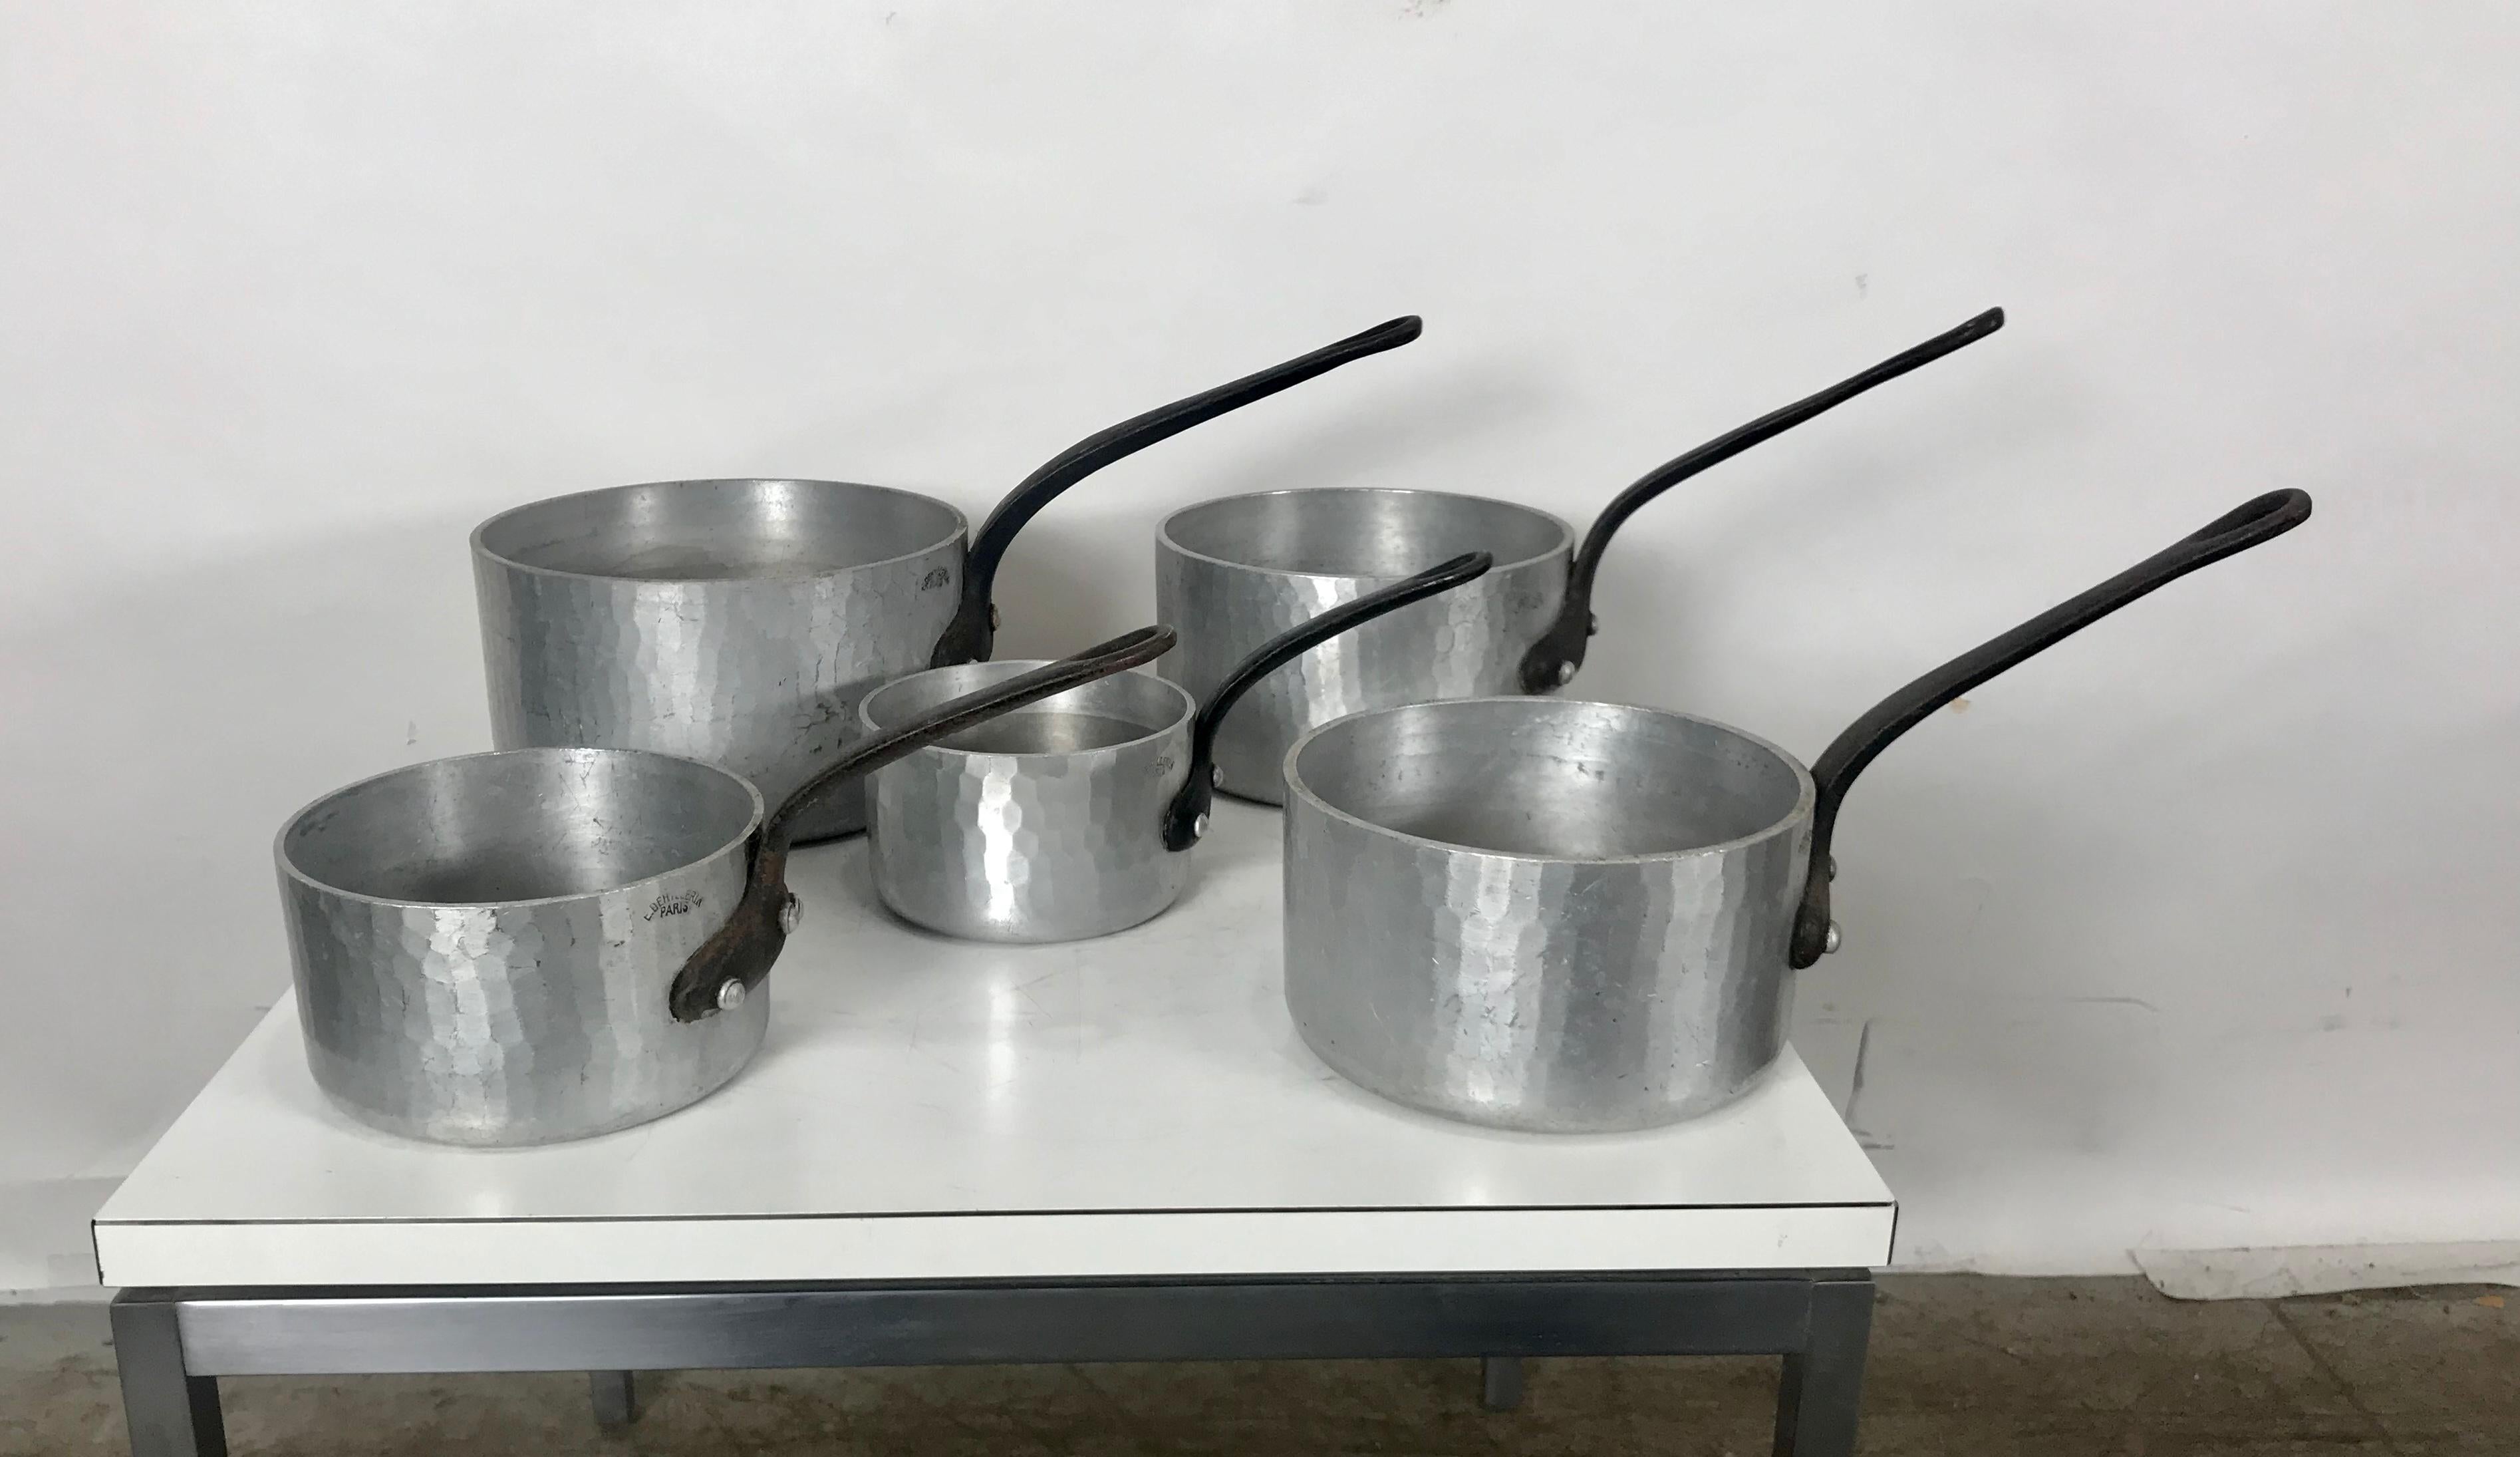 Arts and Crafts Set of 5 Stylized Aluminum Pots. cookwear by E. Dehillerin, Paris